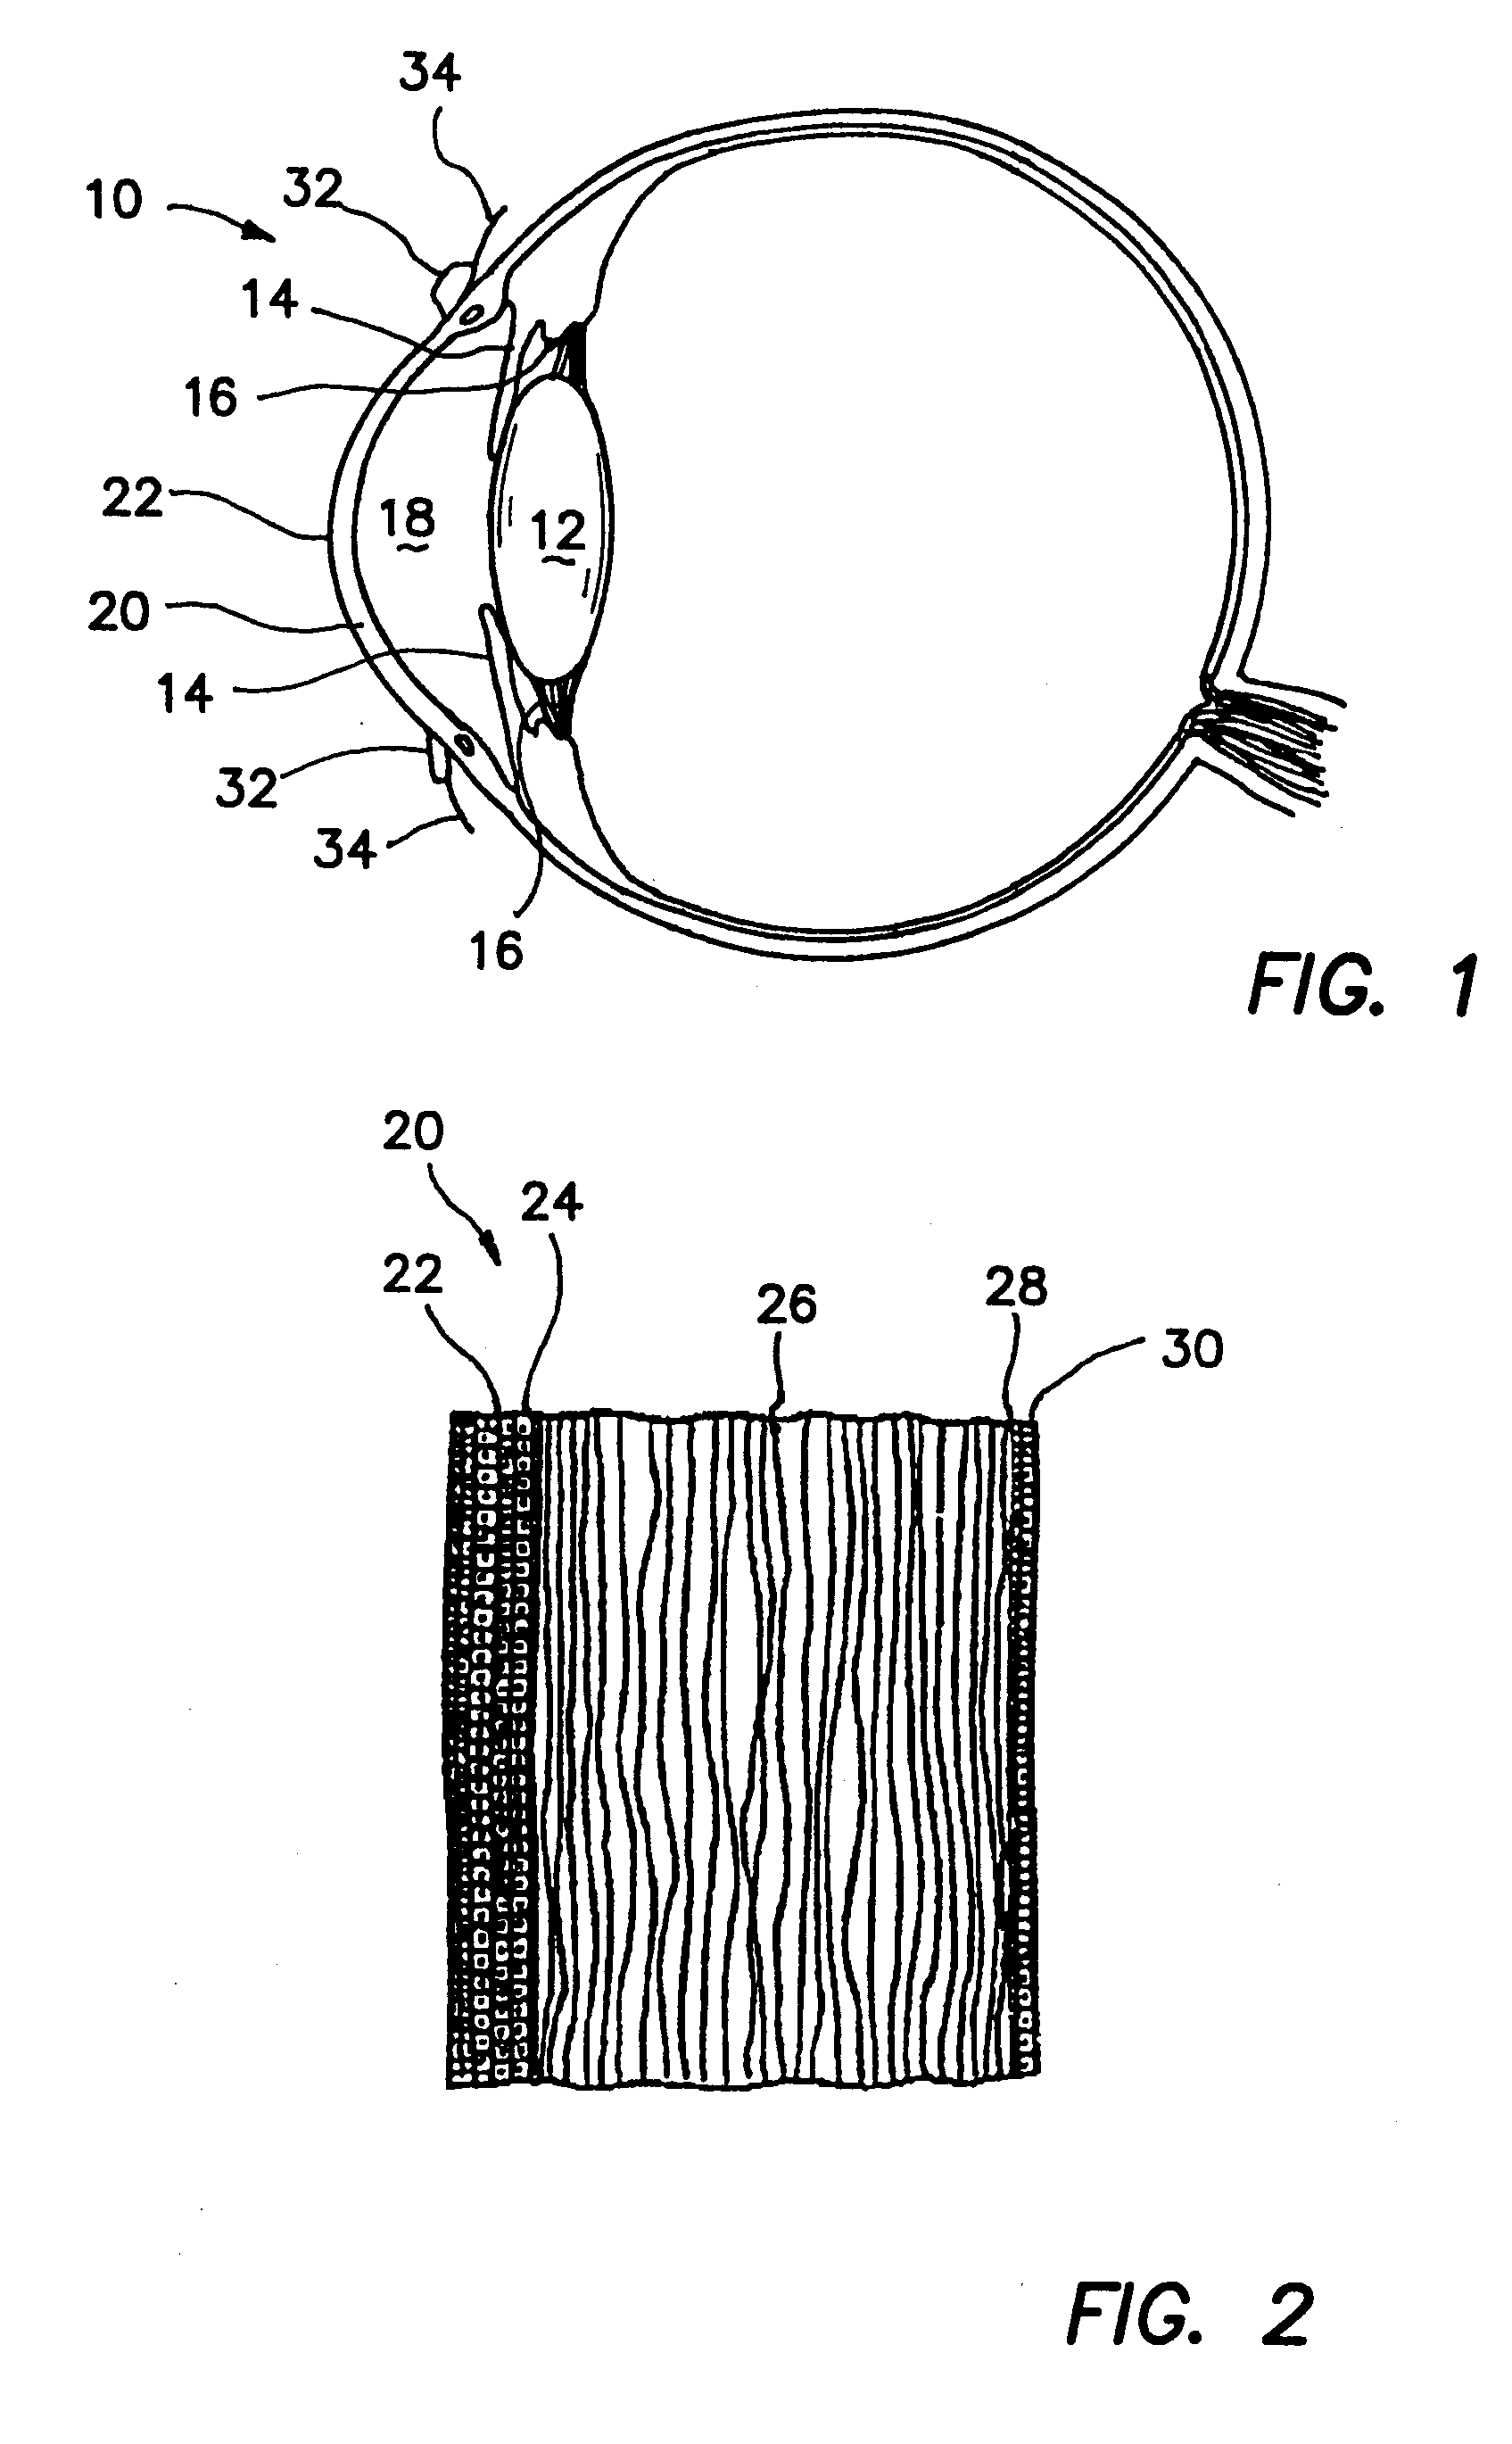 Corneal onlays and methods of producing same